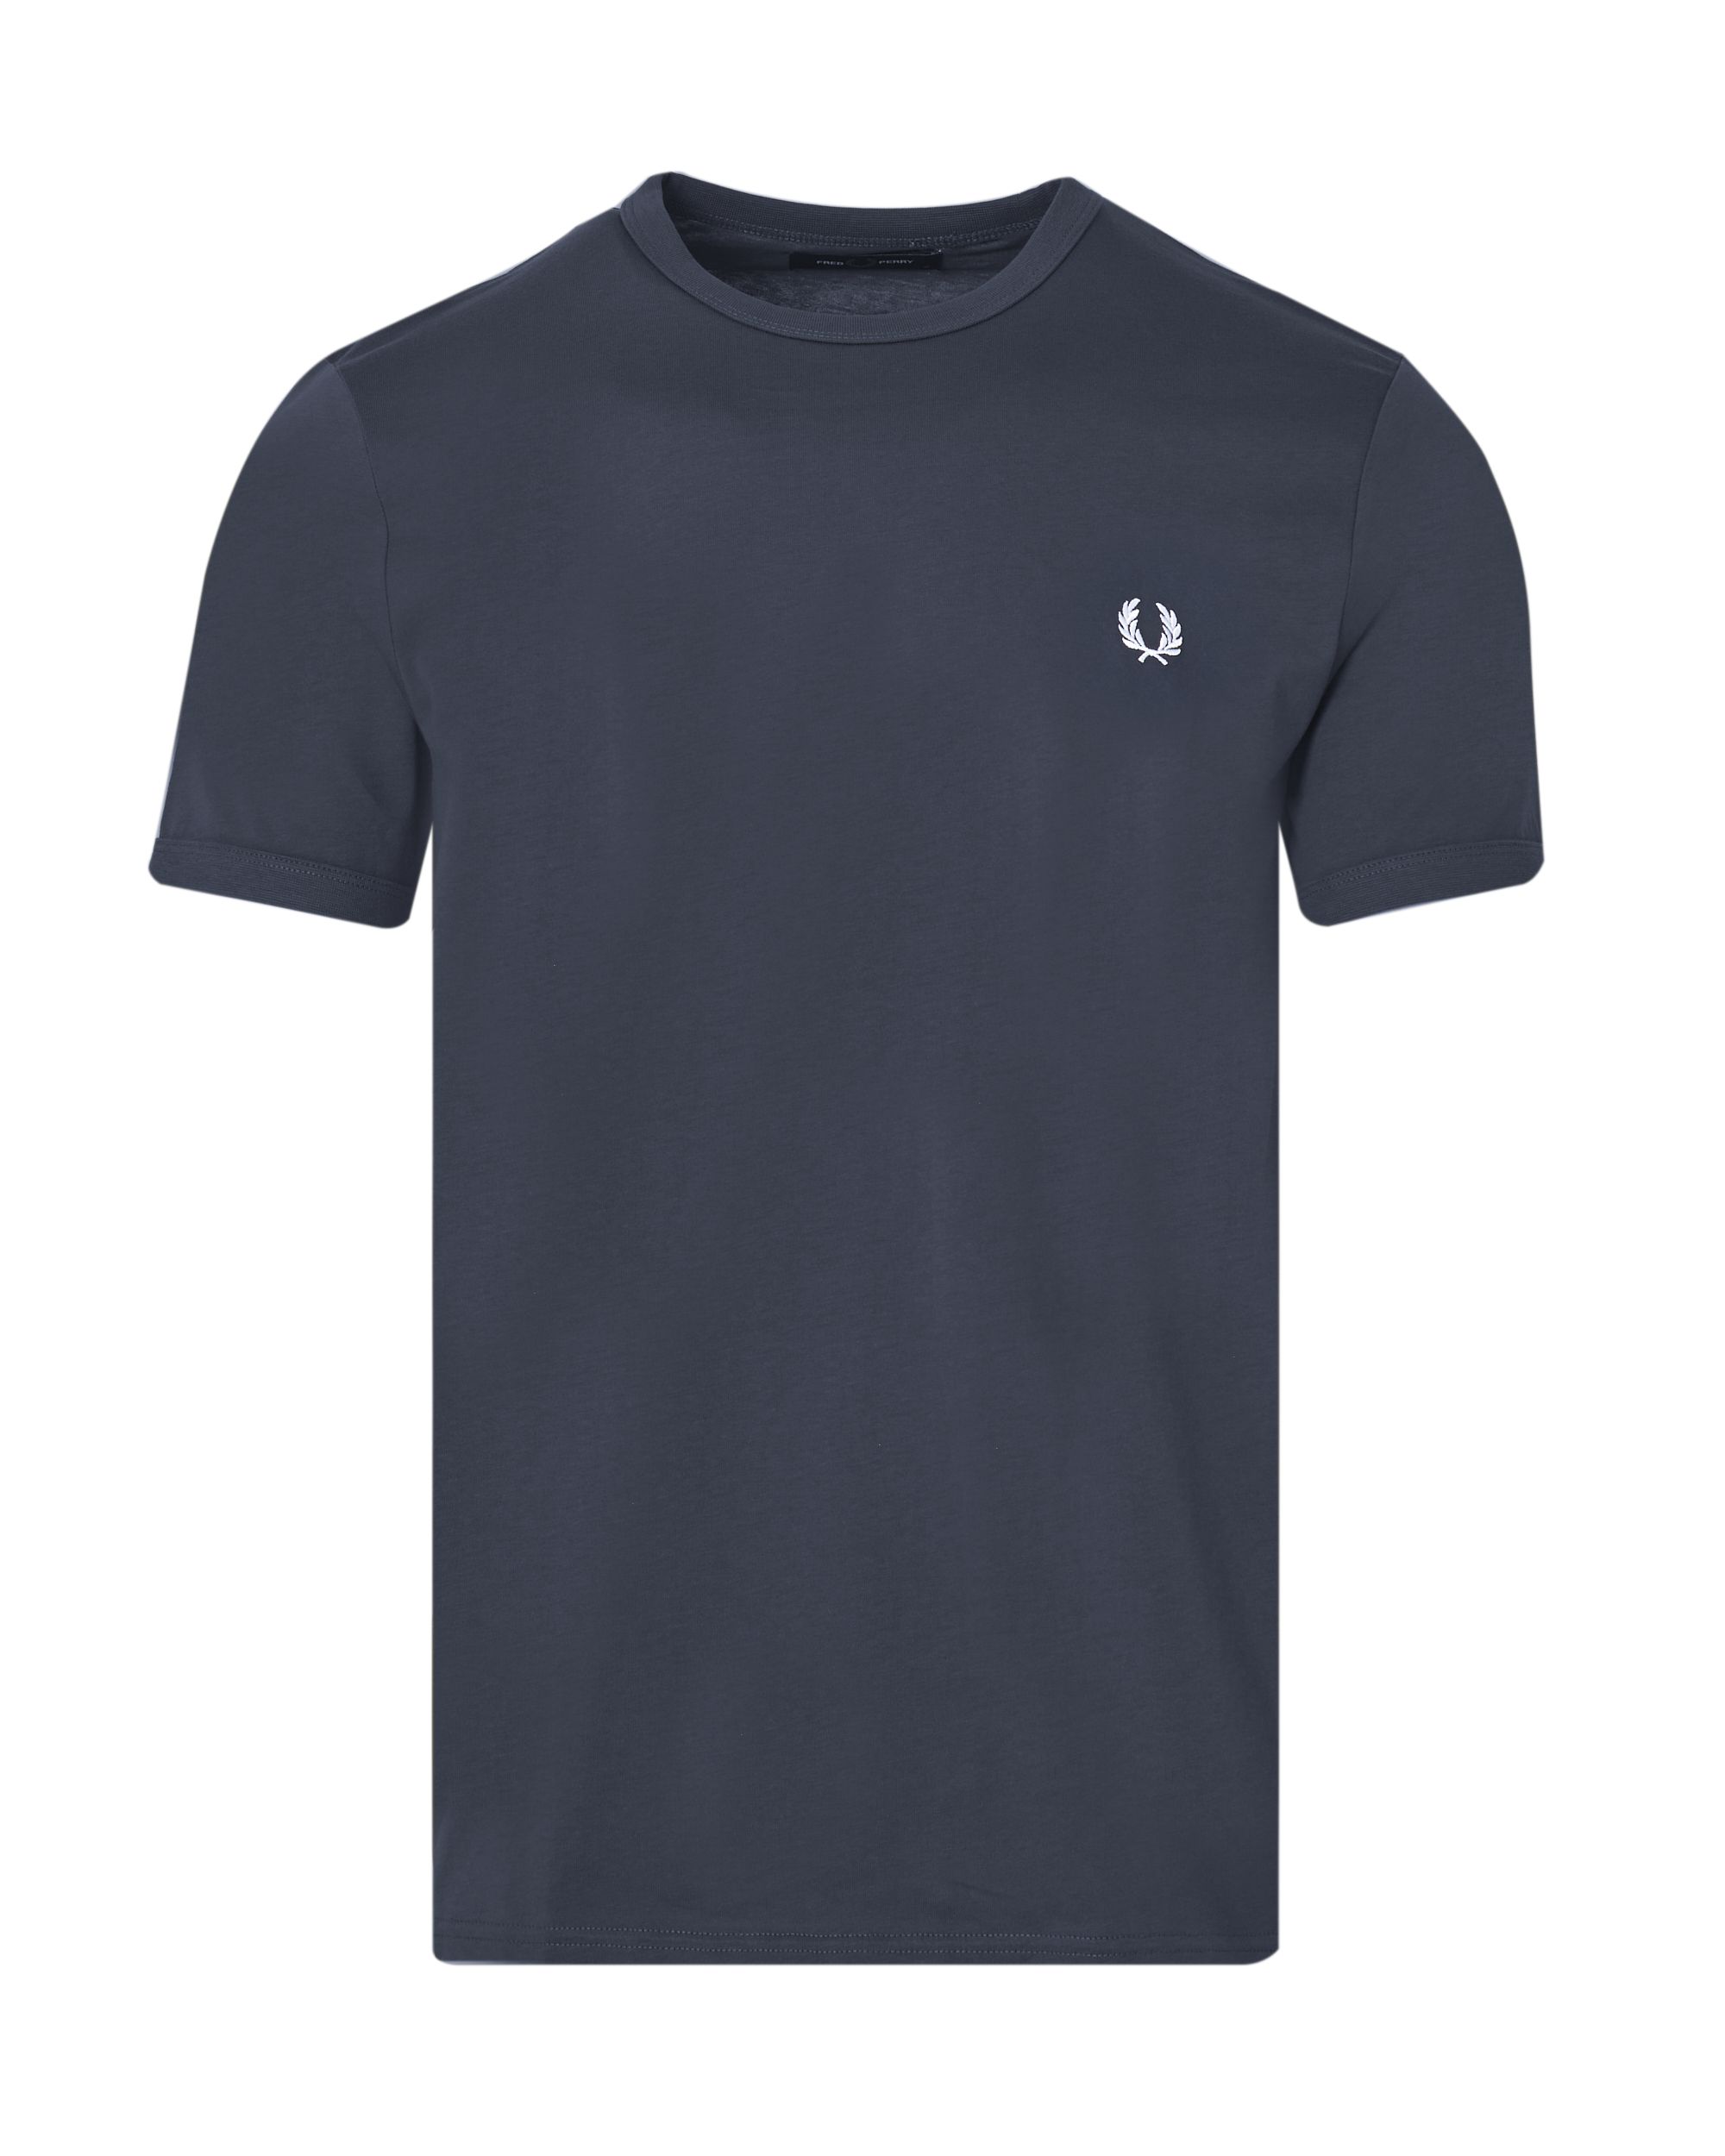 Fred Perry T-shirt KM Donker blauw 083517-001-L